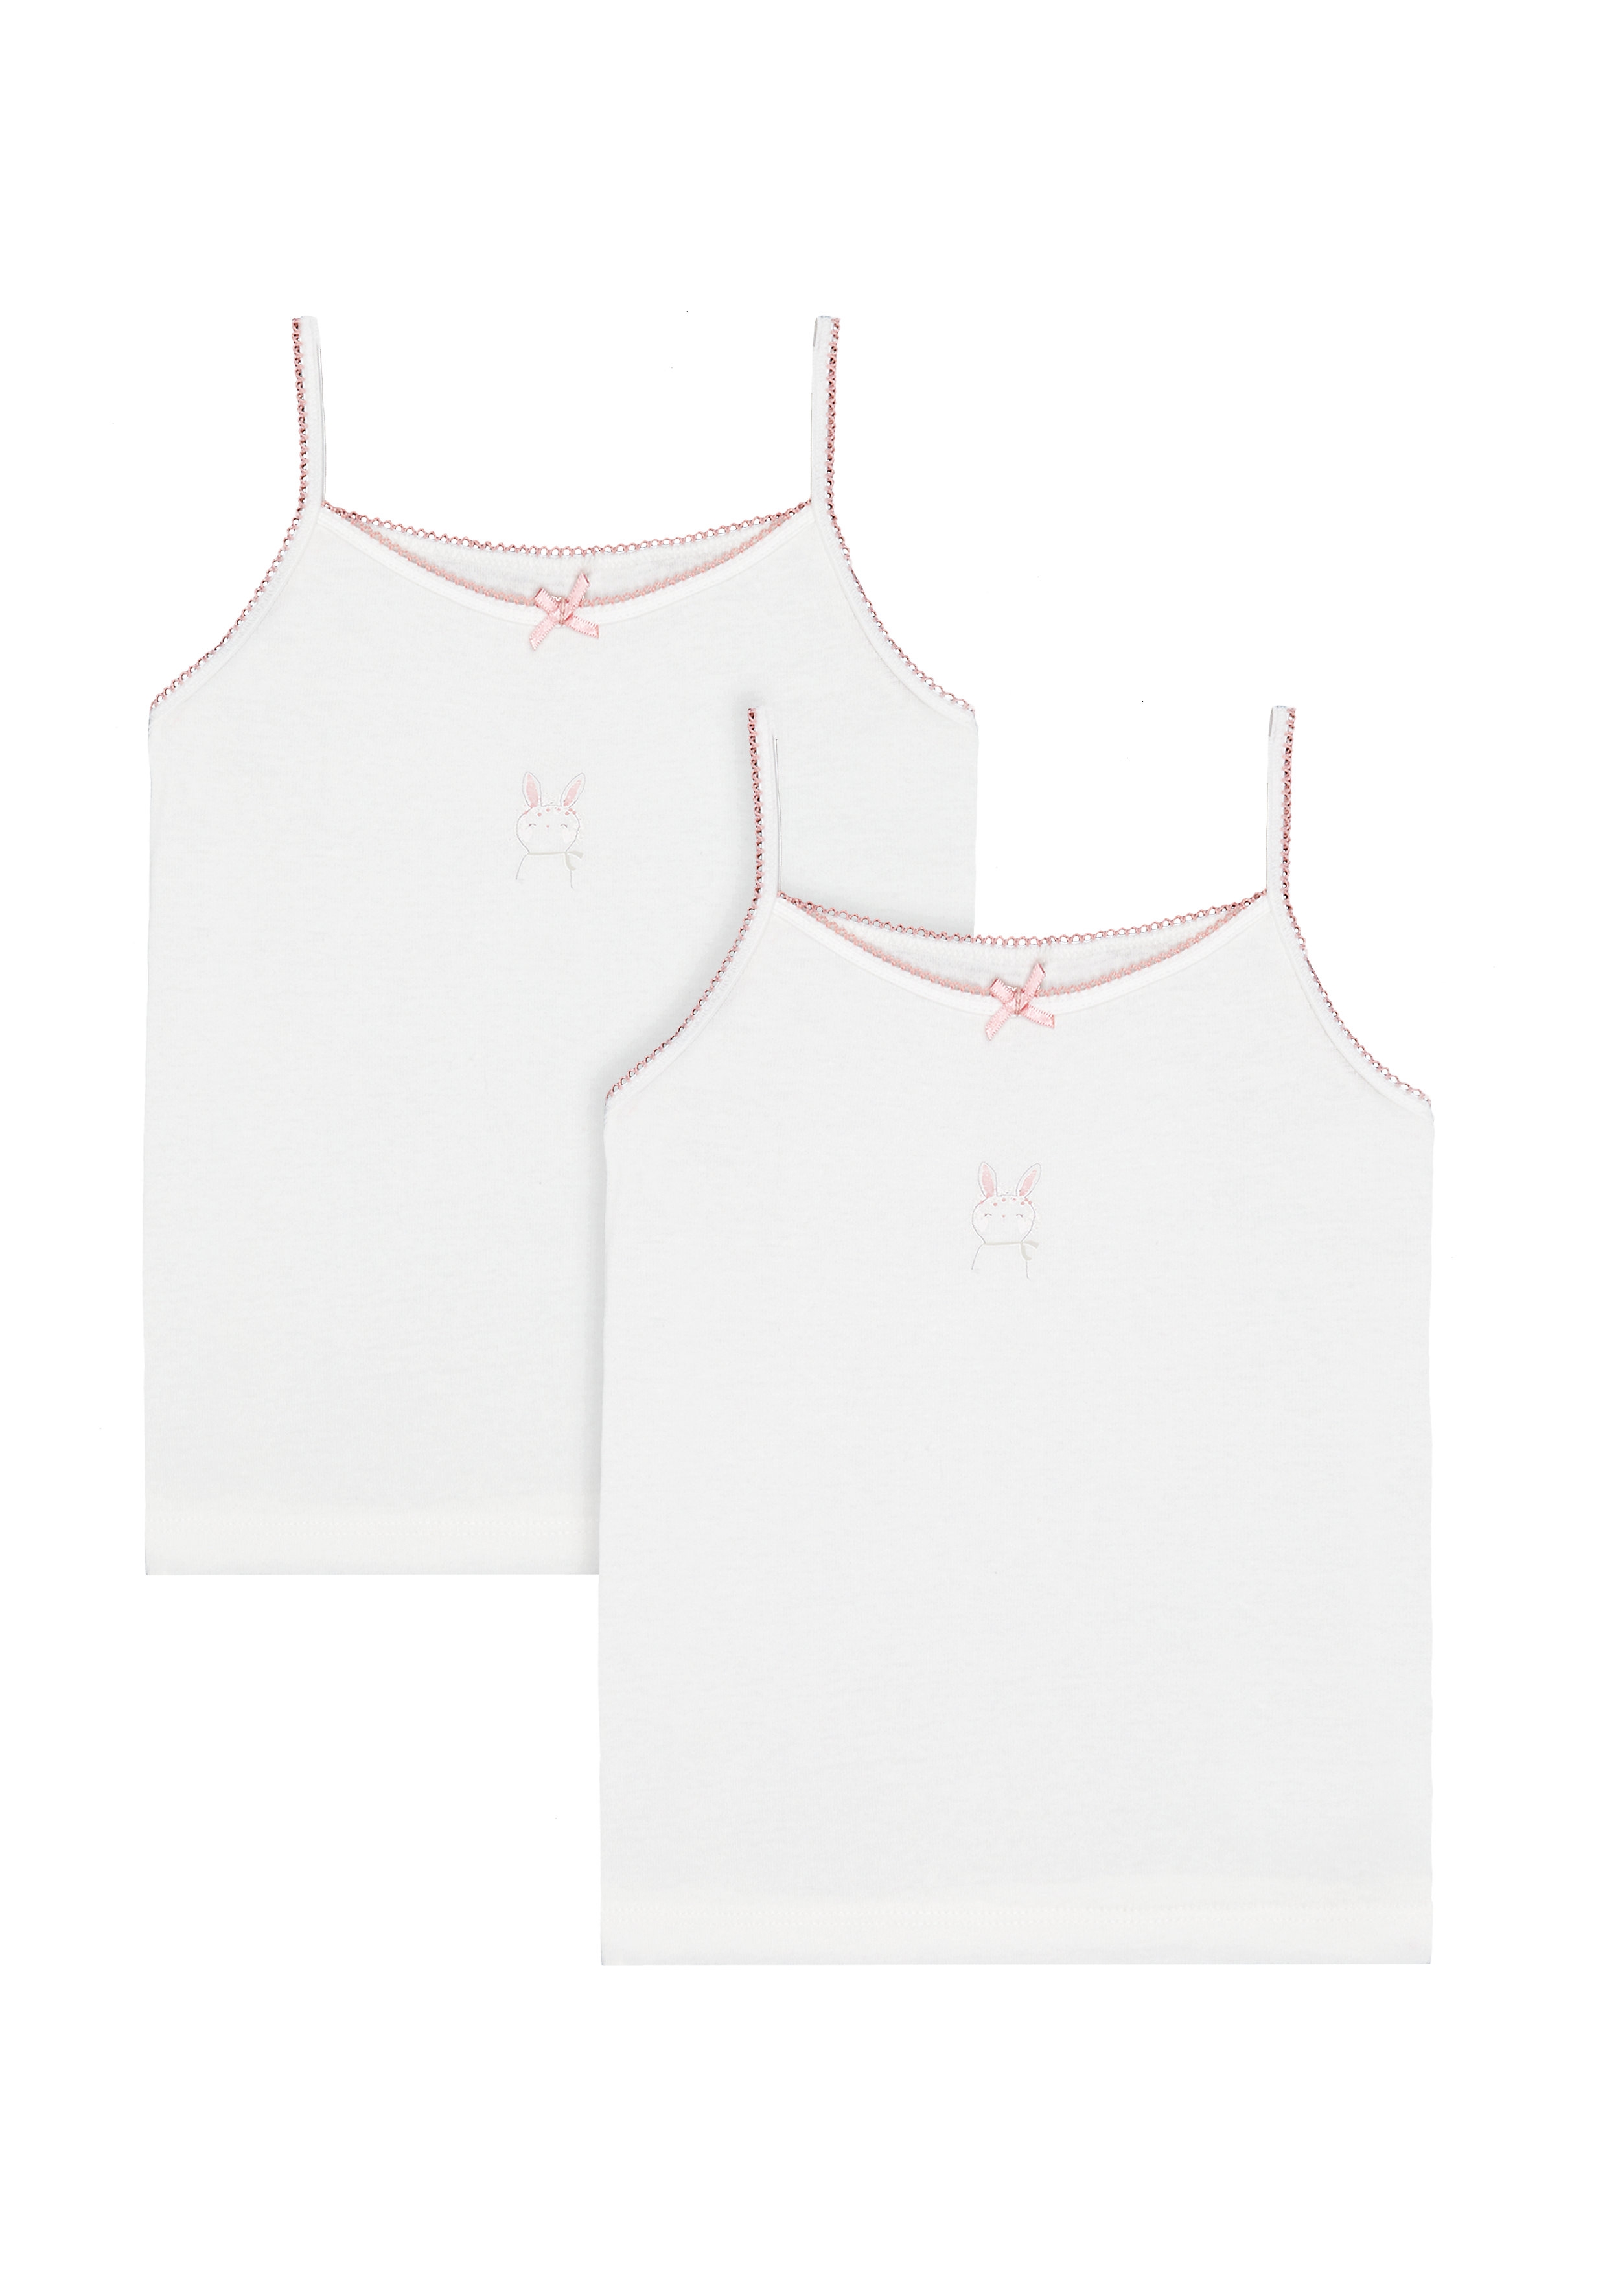 Mothercare | Girls Bunny Cami Vests - 2 Pack - Multicolor 0